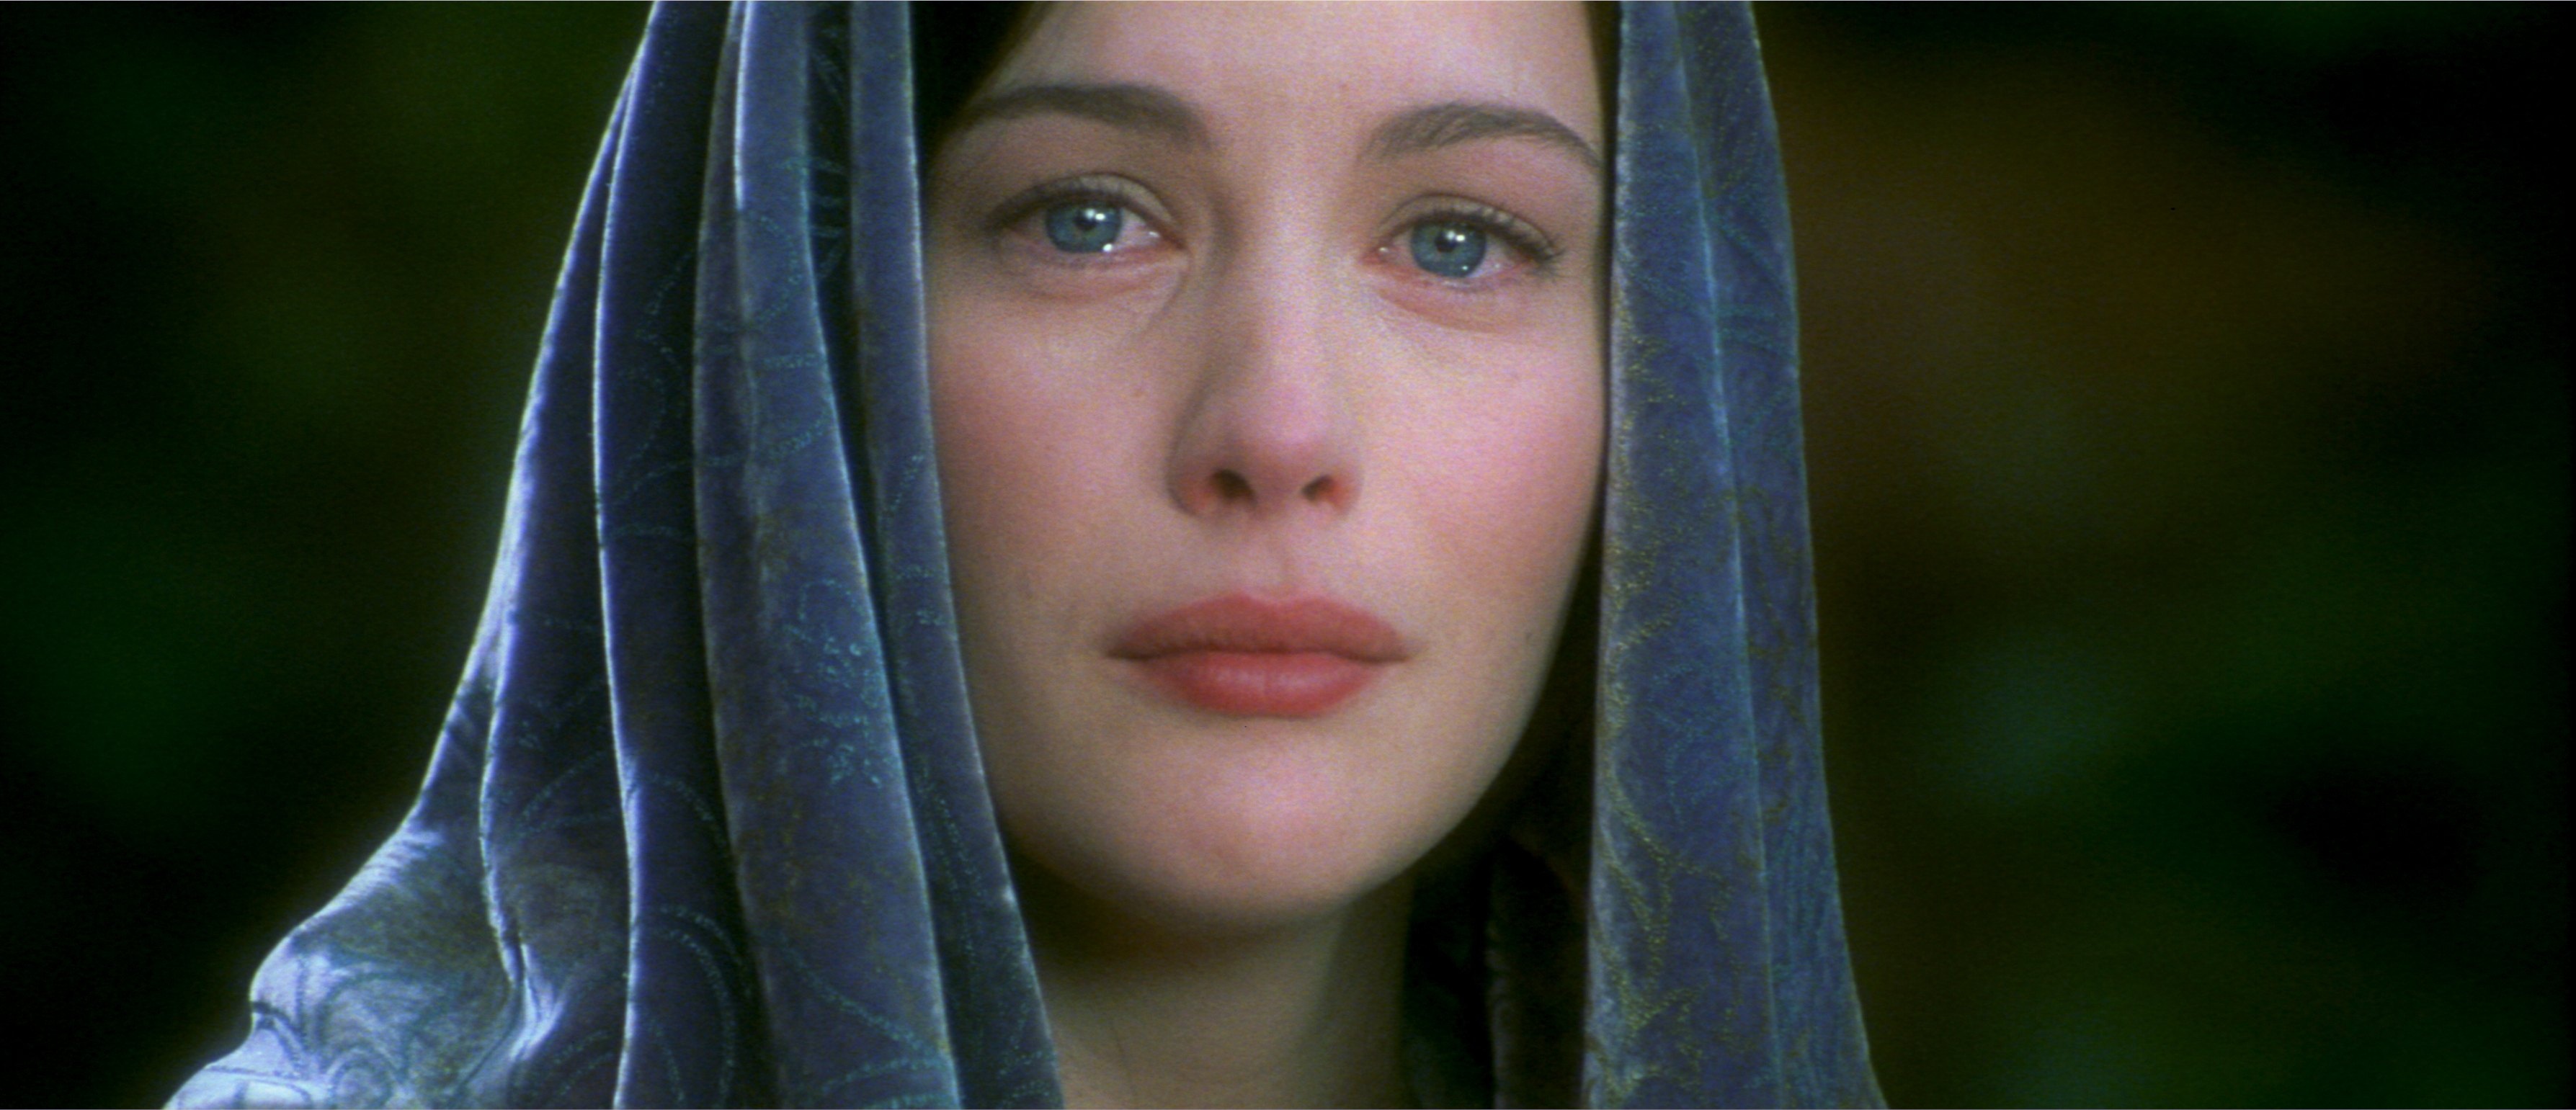 The Return of the King: Liv Tyler as Arwen, Elrond's daughter. 3580x1550 Dual Screen Background.